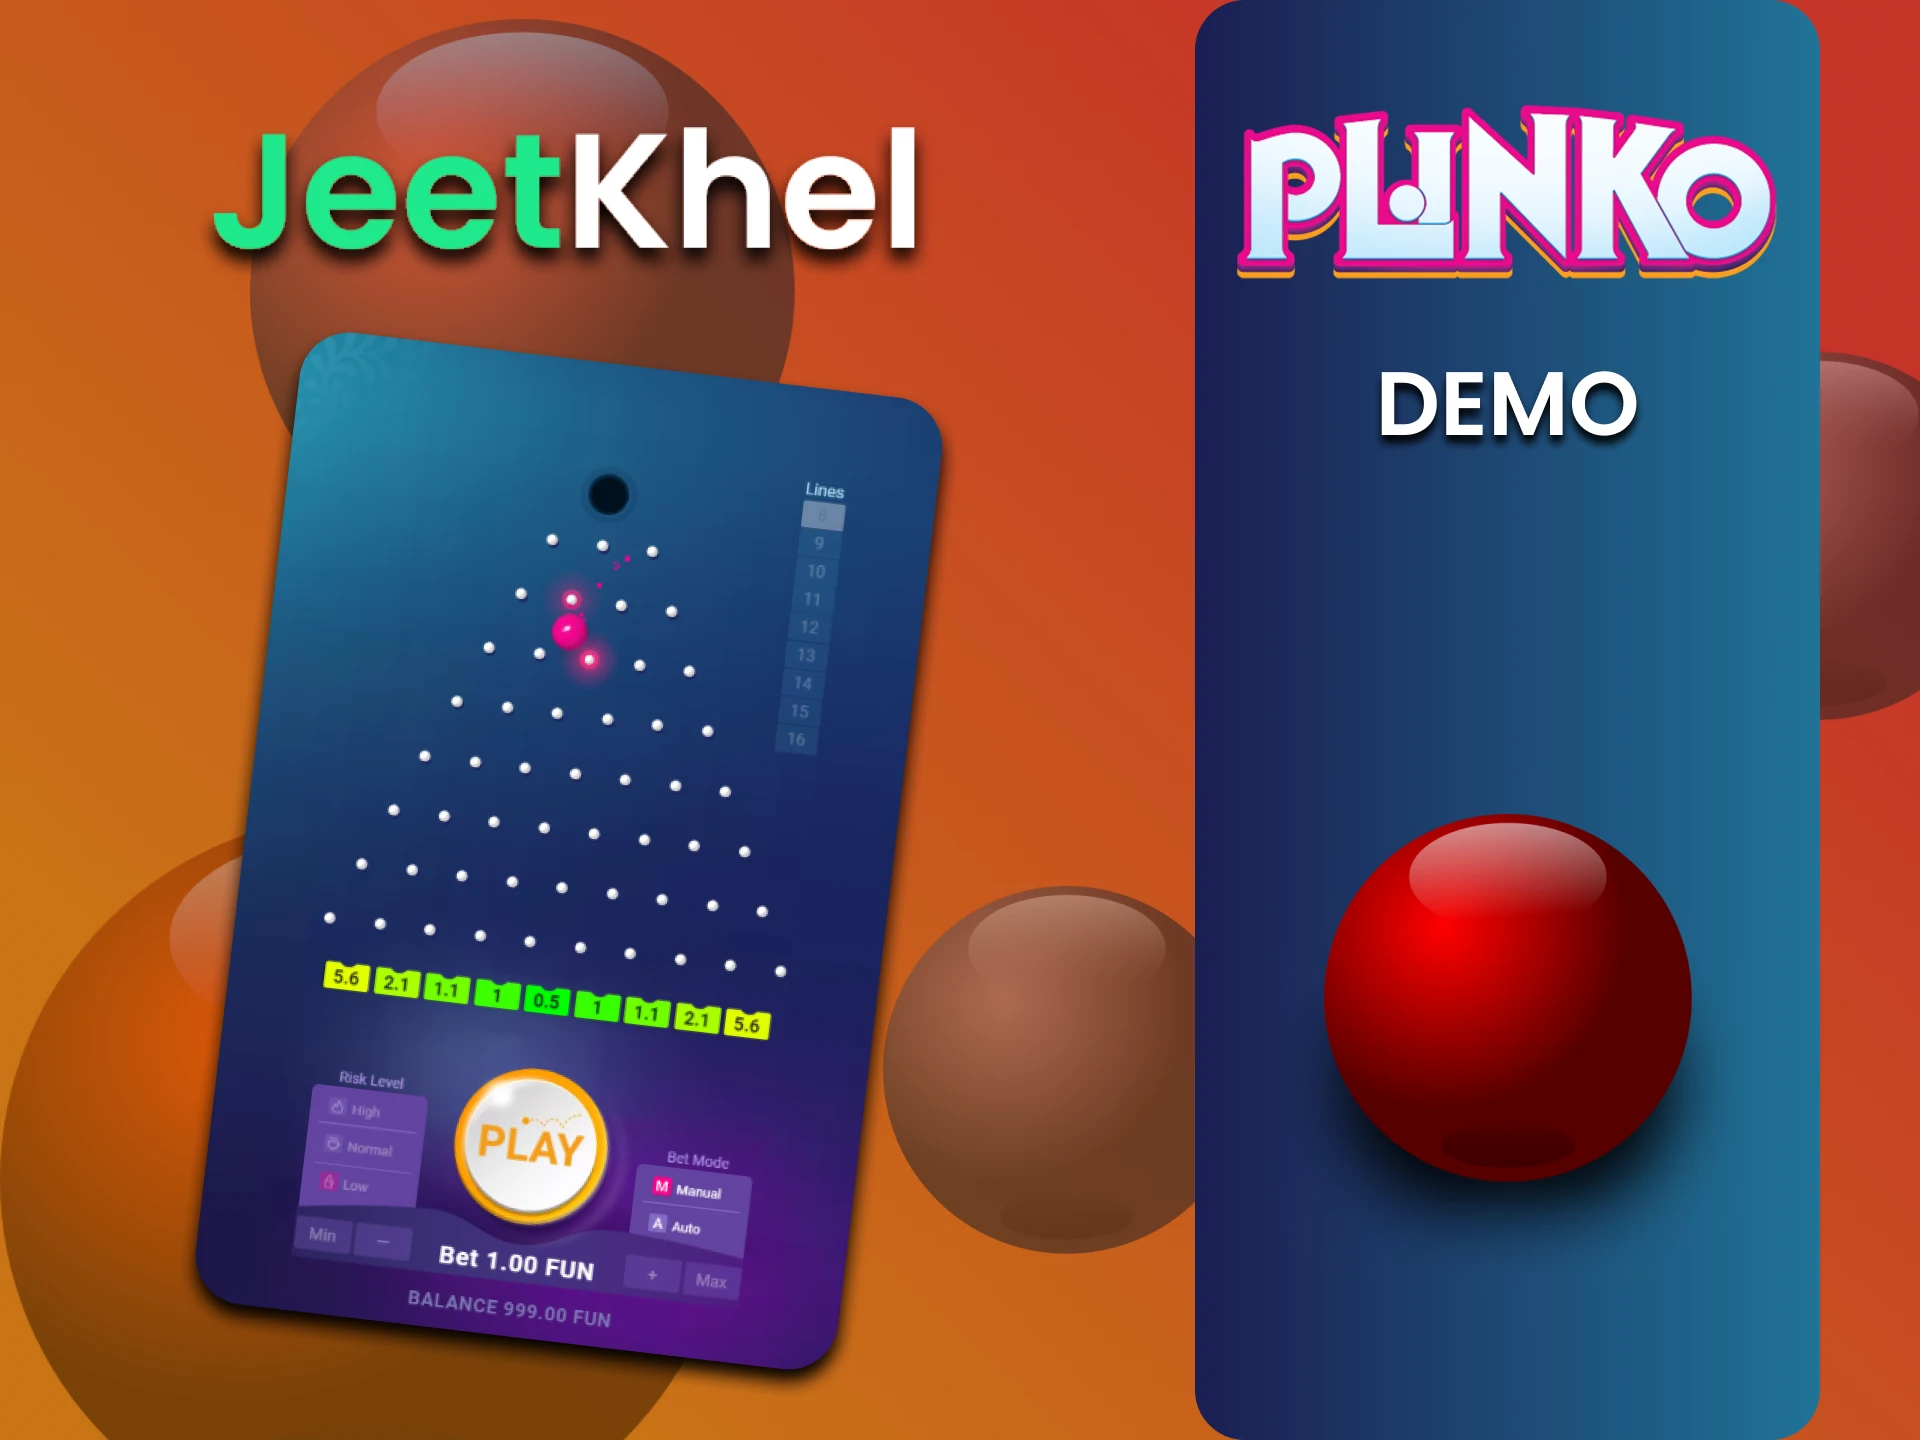 You can train in the demo version of the Plinko game on the JeetKhel website.